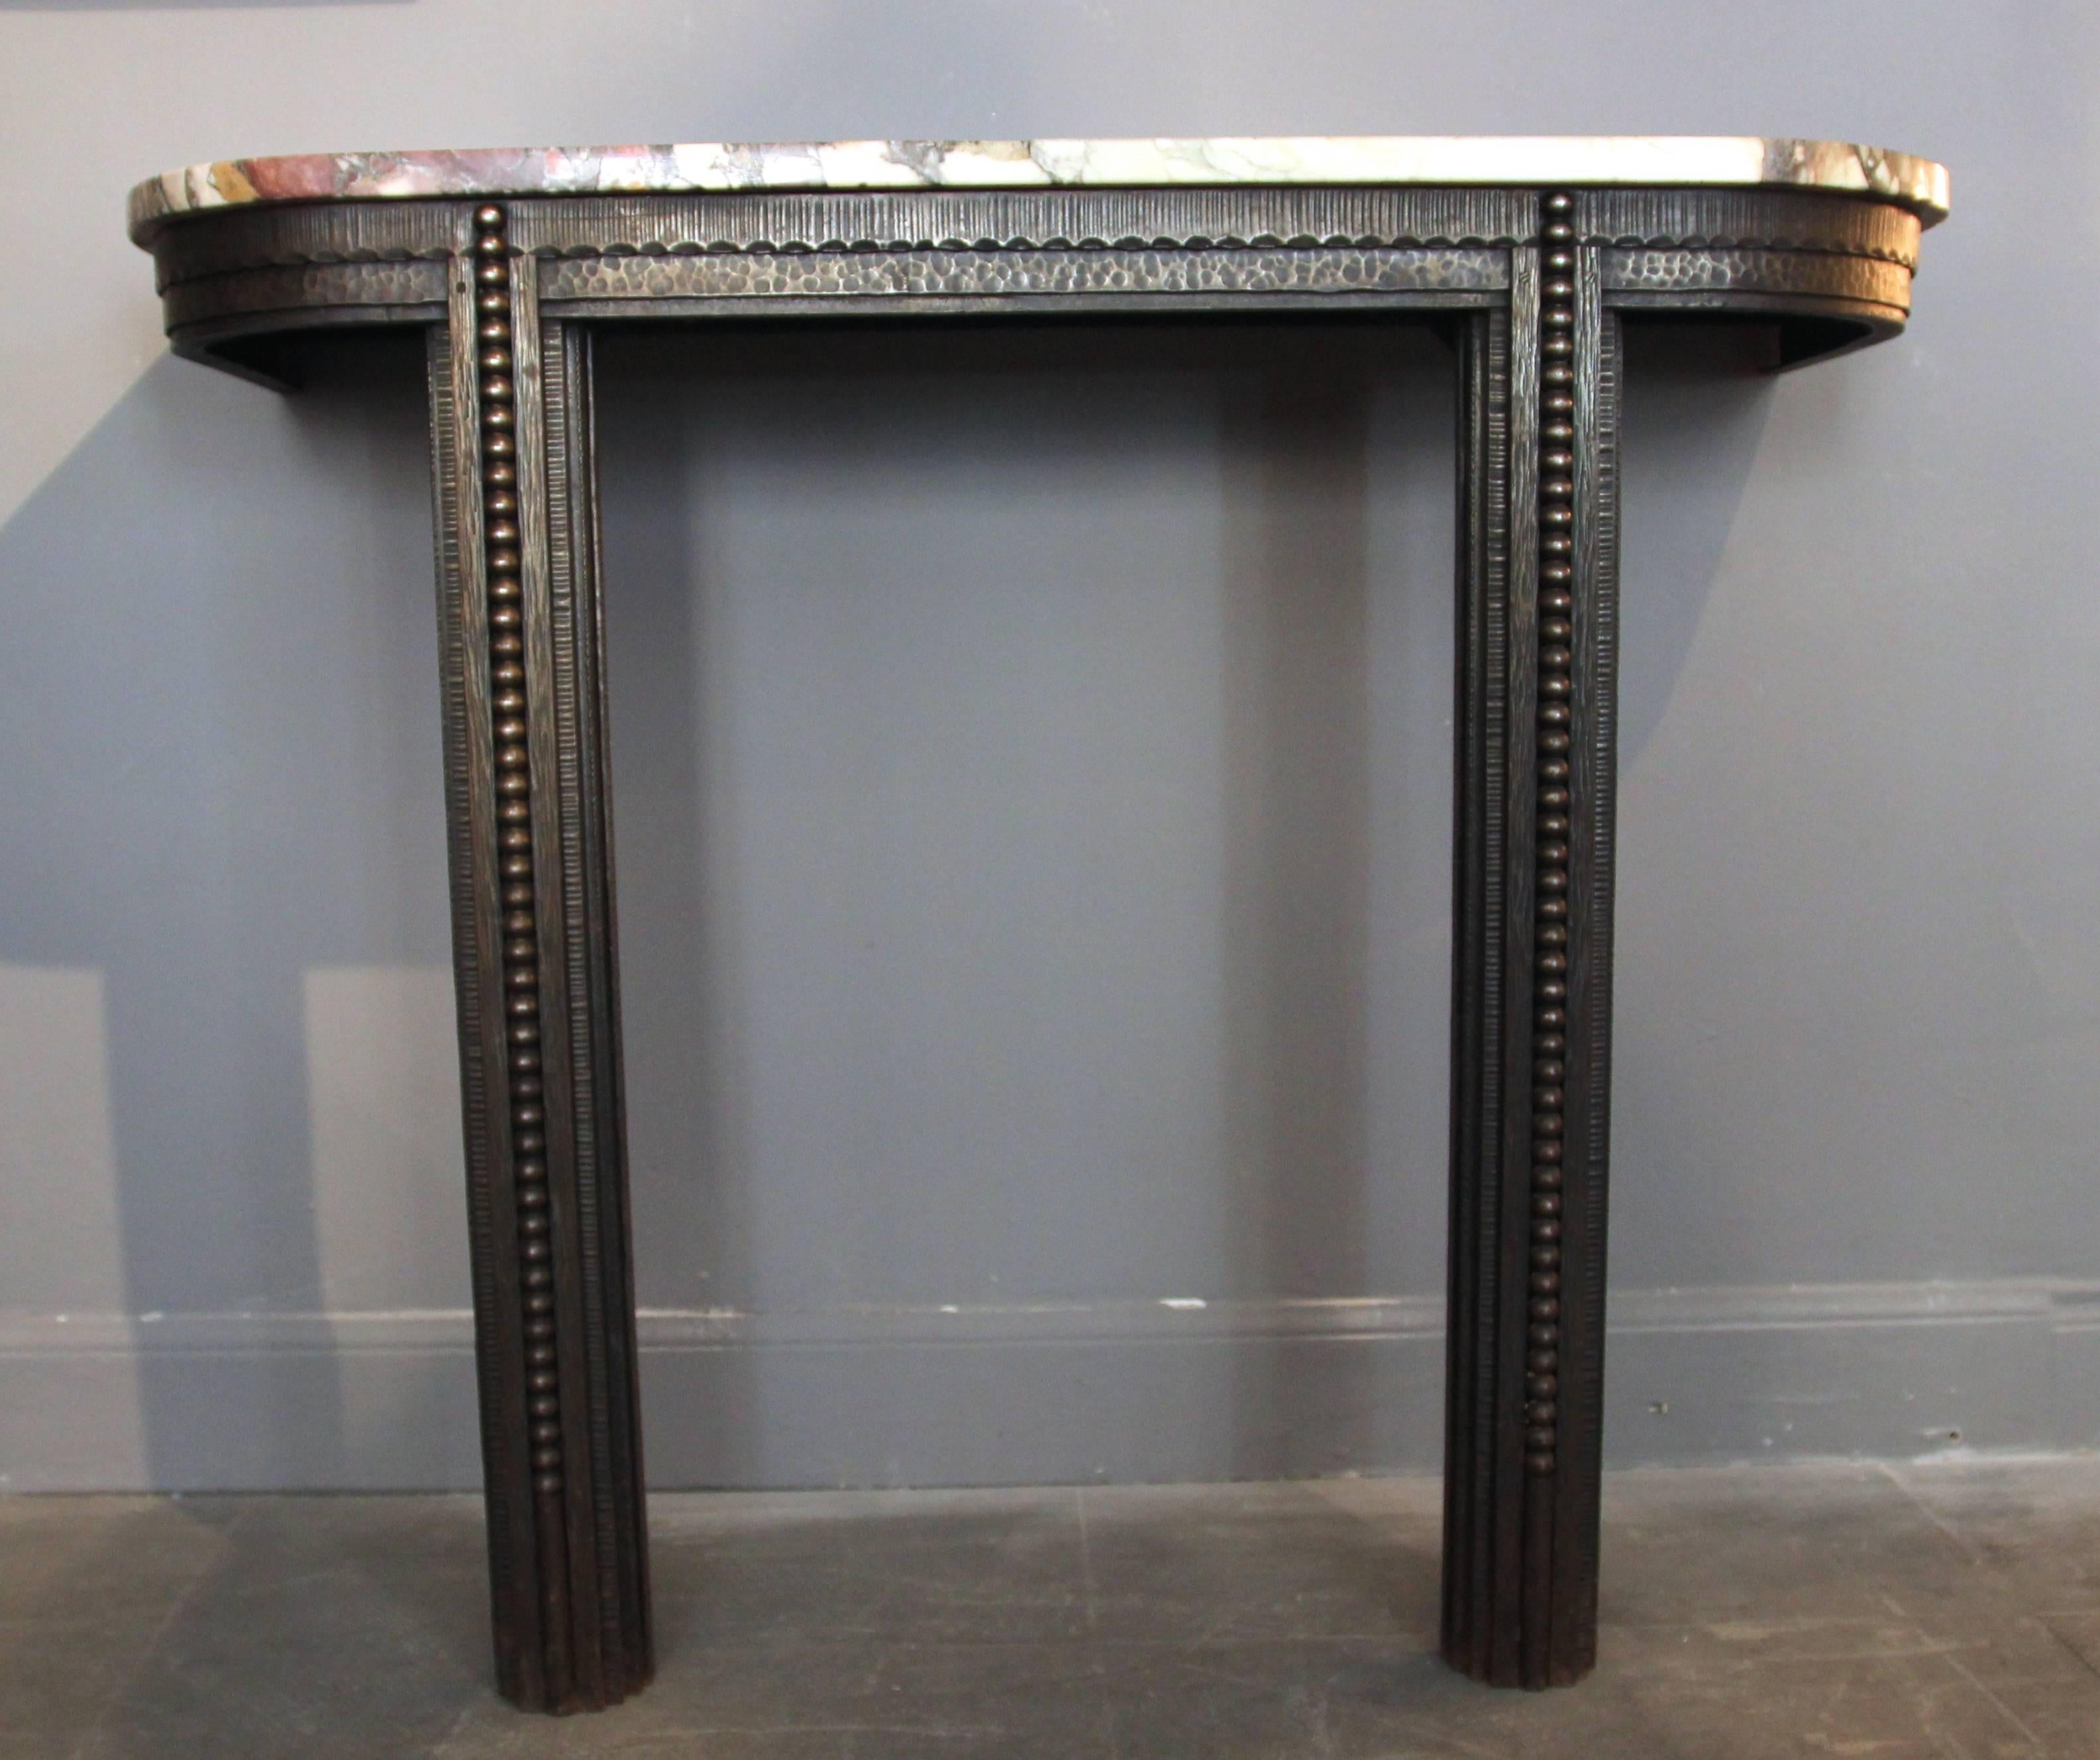 Style Edgar Brandt, console,
iron sculpted and marble top,
circa 1925, France.
Measures: Height 91 cm, width 110 cm, depth 40 cm,
Top thickness: 2 cm.